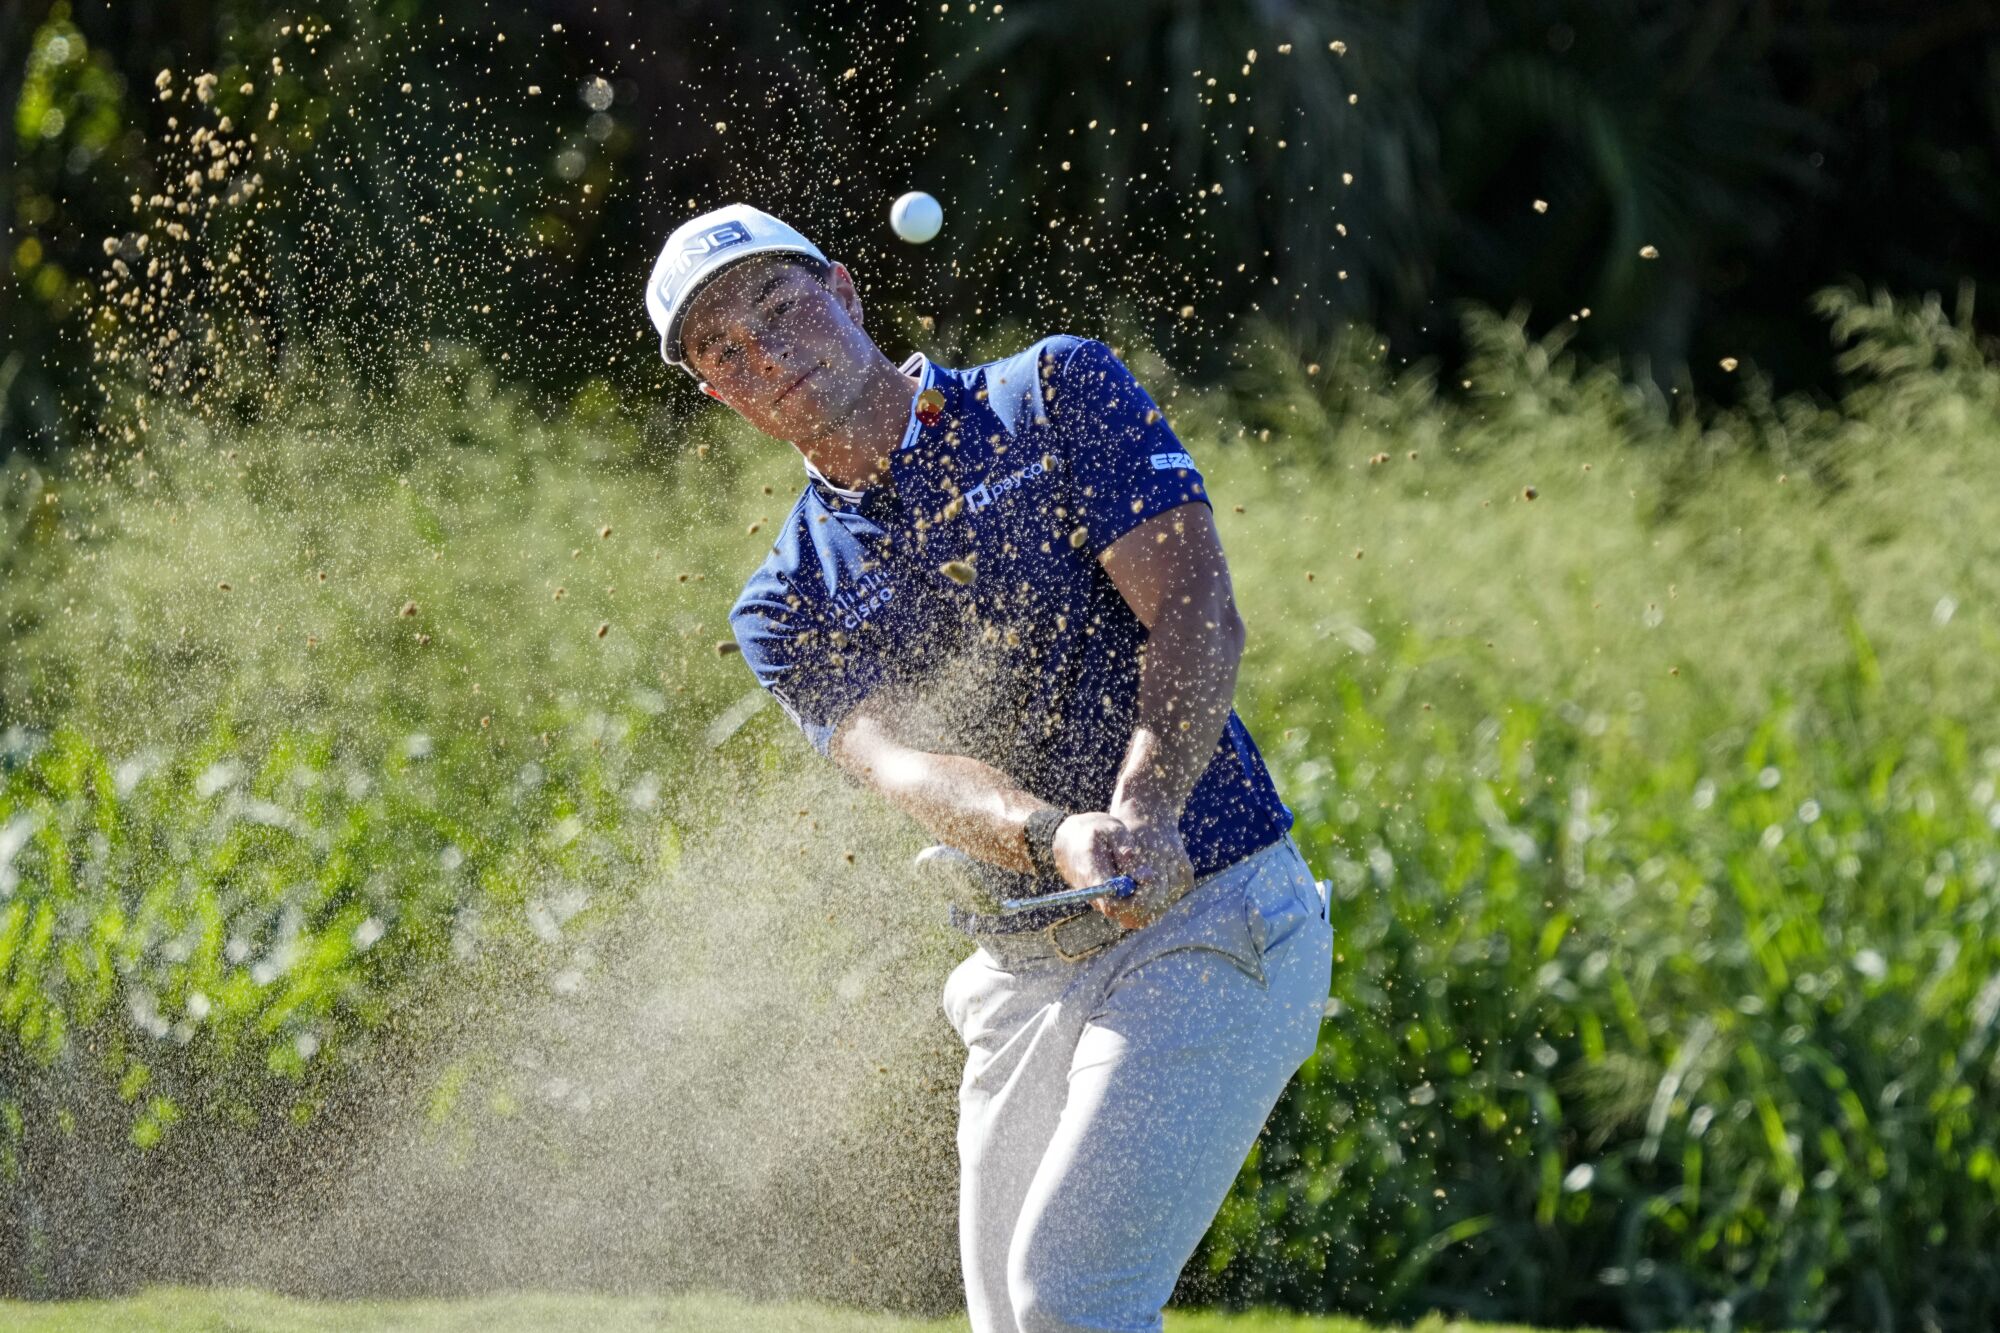 Norway's Viktor Hovland plays a shot from a bunker during the Tournament of Champions on Jan. 5 in Kapalua, Hawaii.